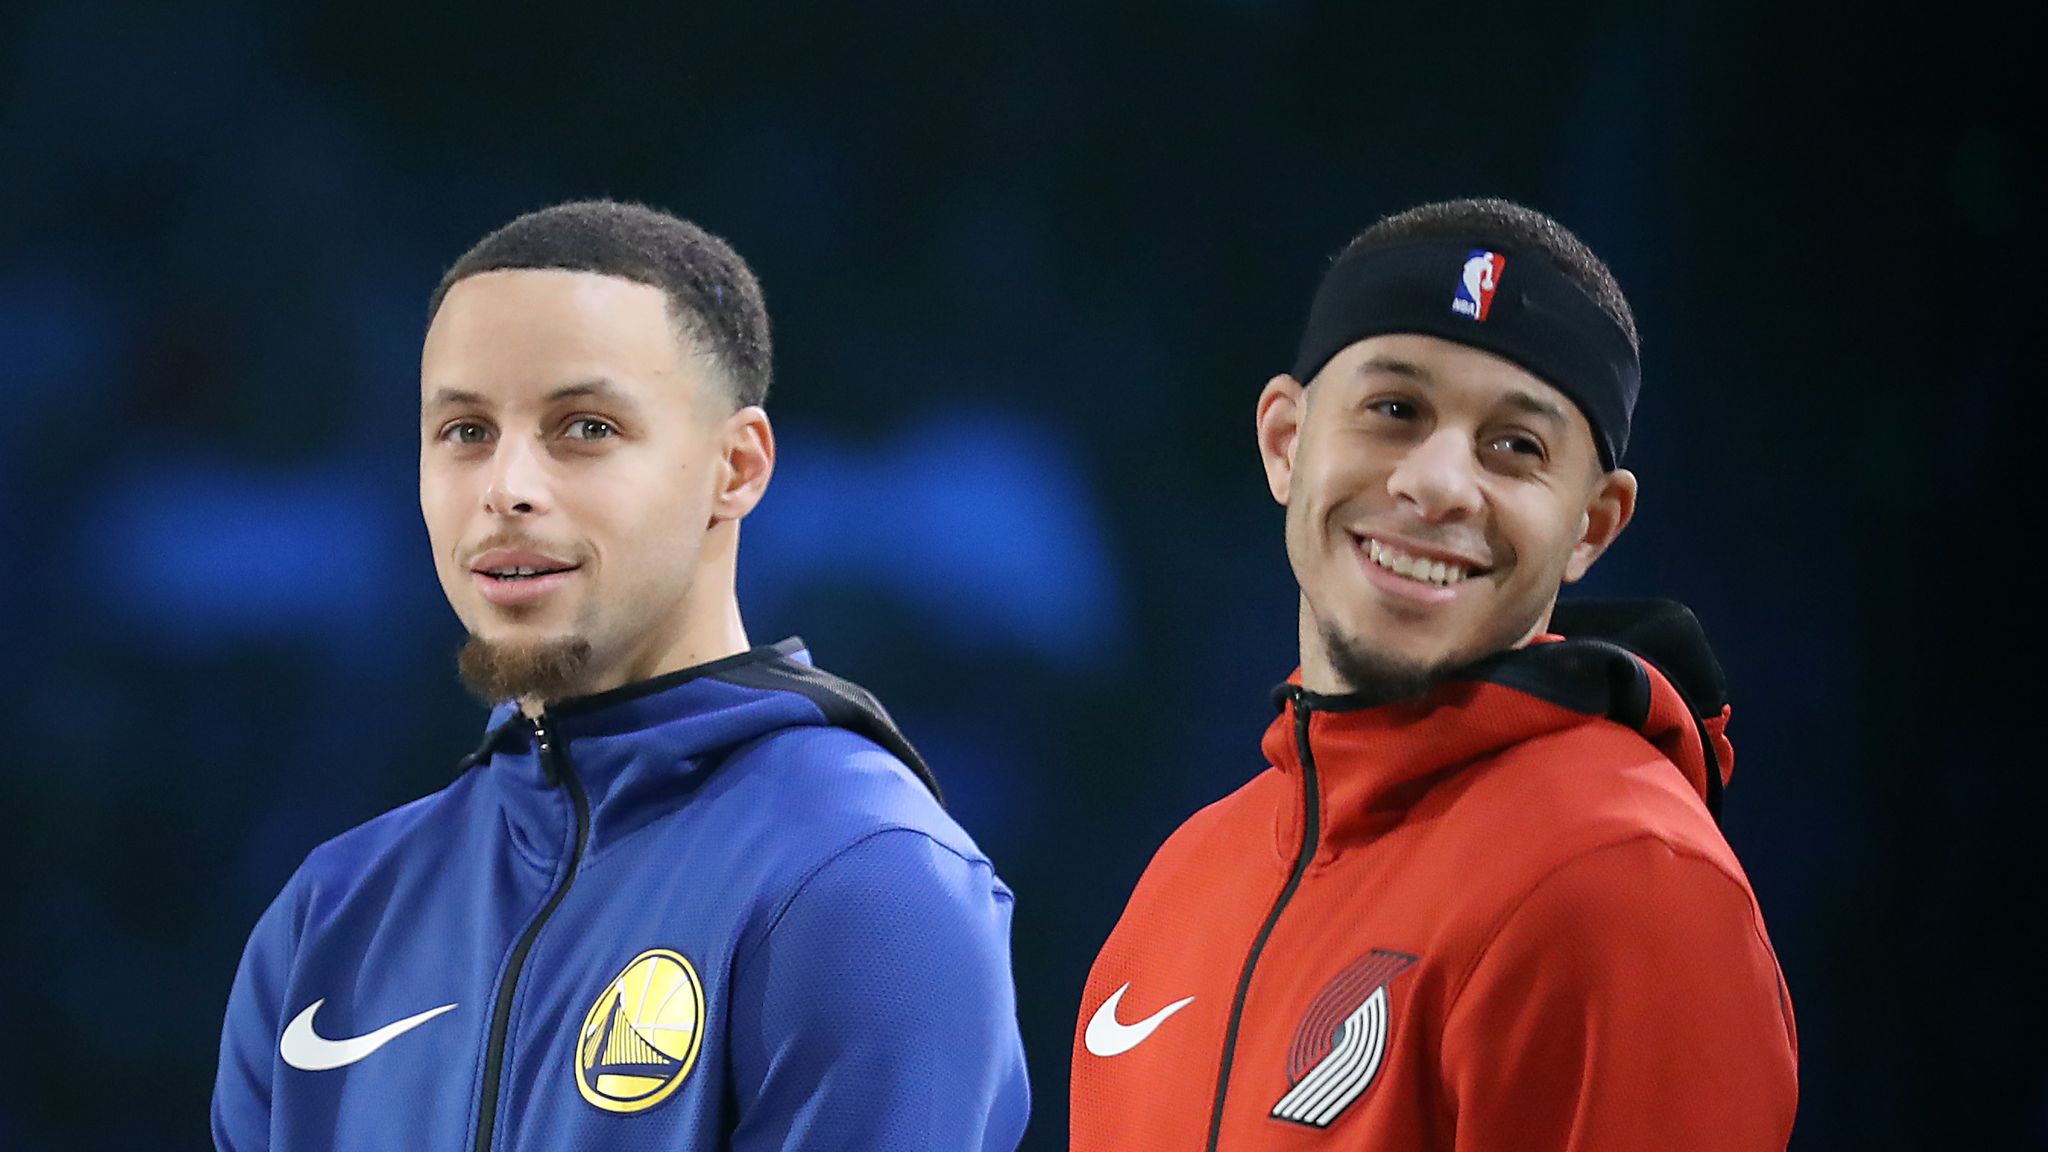 Dell and Sonya Curry will flip a coin to see what son they root fore, Seth  of the Blazers or Steph of the Warriors in the Western Conference Final